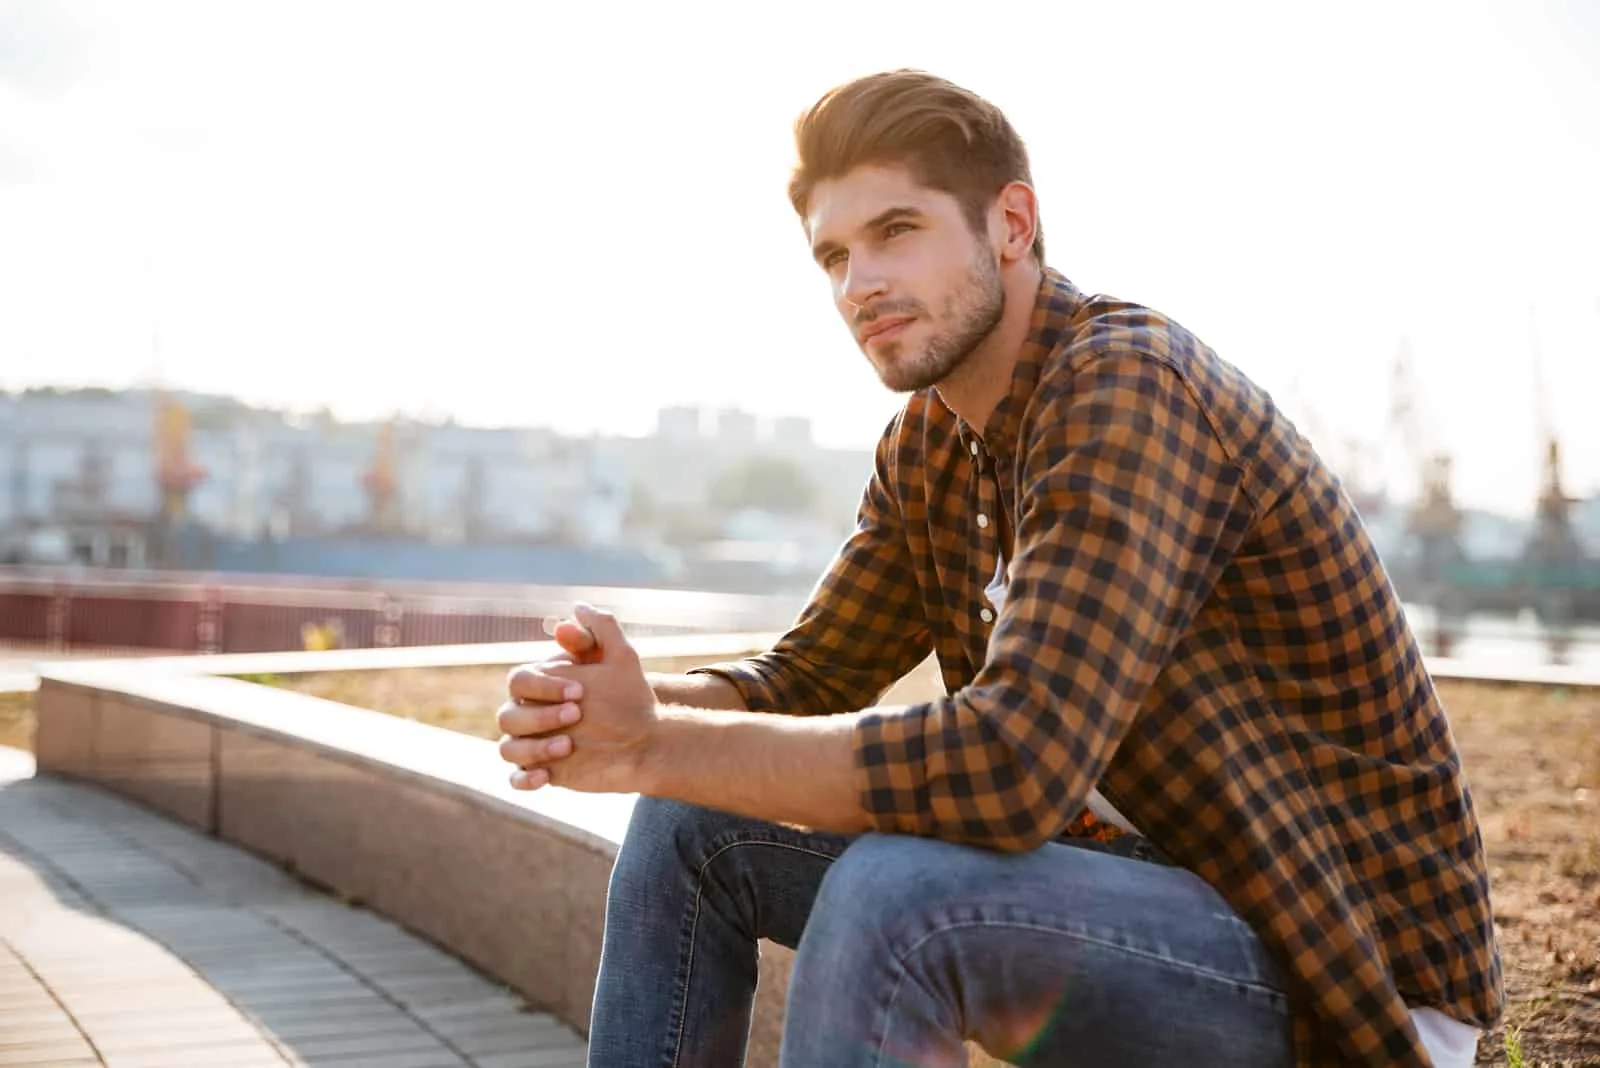 Pensive young man in plaid shirt sitting and thinking outdoors